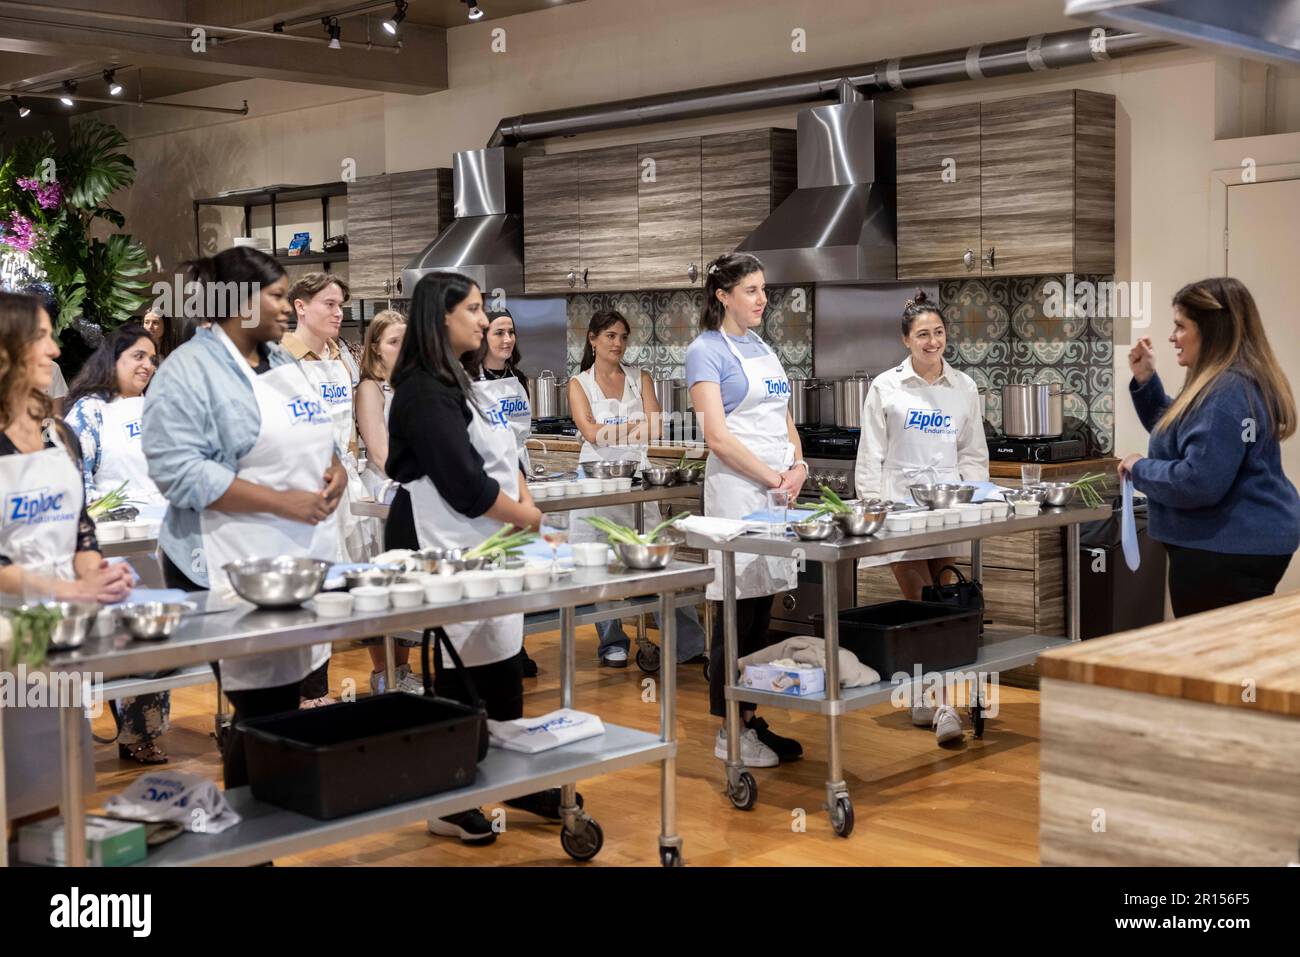 IMAGE DISTRIBUTED FOR ZIPLOC ENDURABLES - Alex Guarnaschelli uses Ziploc  Brand Endurables as she leads a cooking demonstration ahead of Mother's Day  with her daughter Ava Clark in New York, Wednesday, May